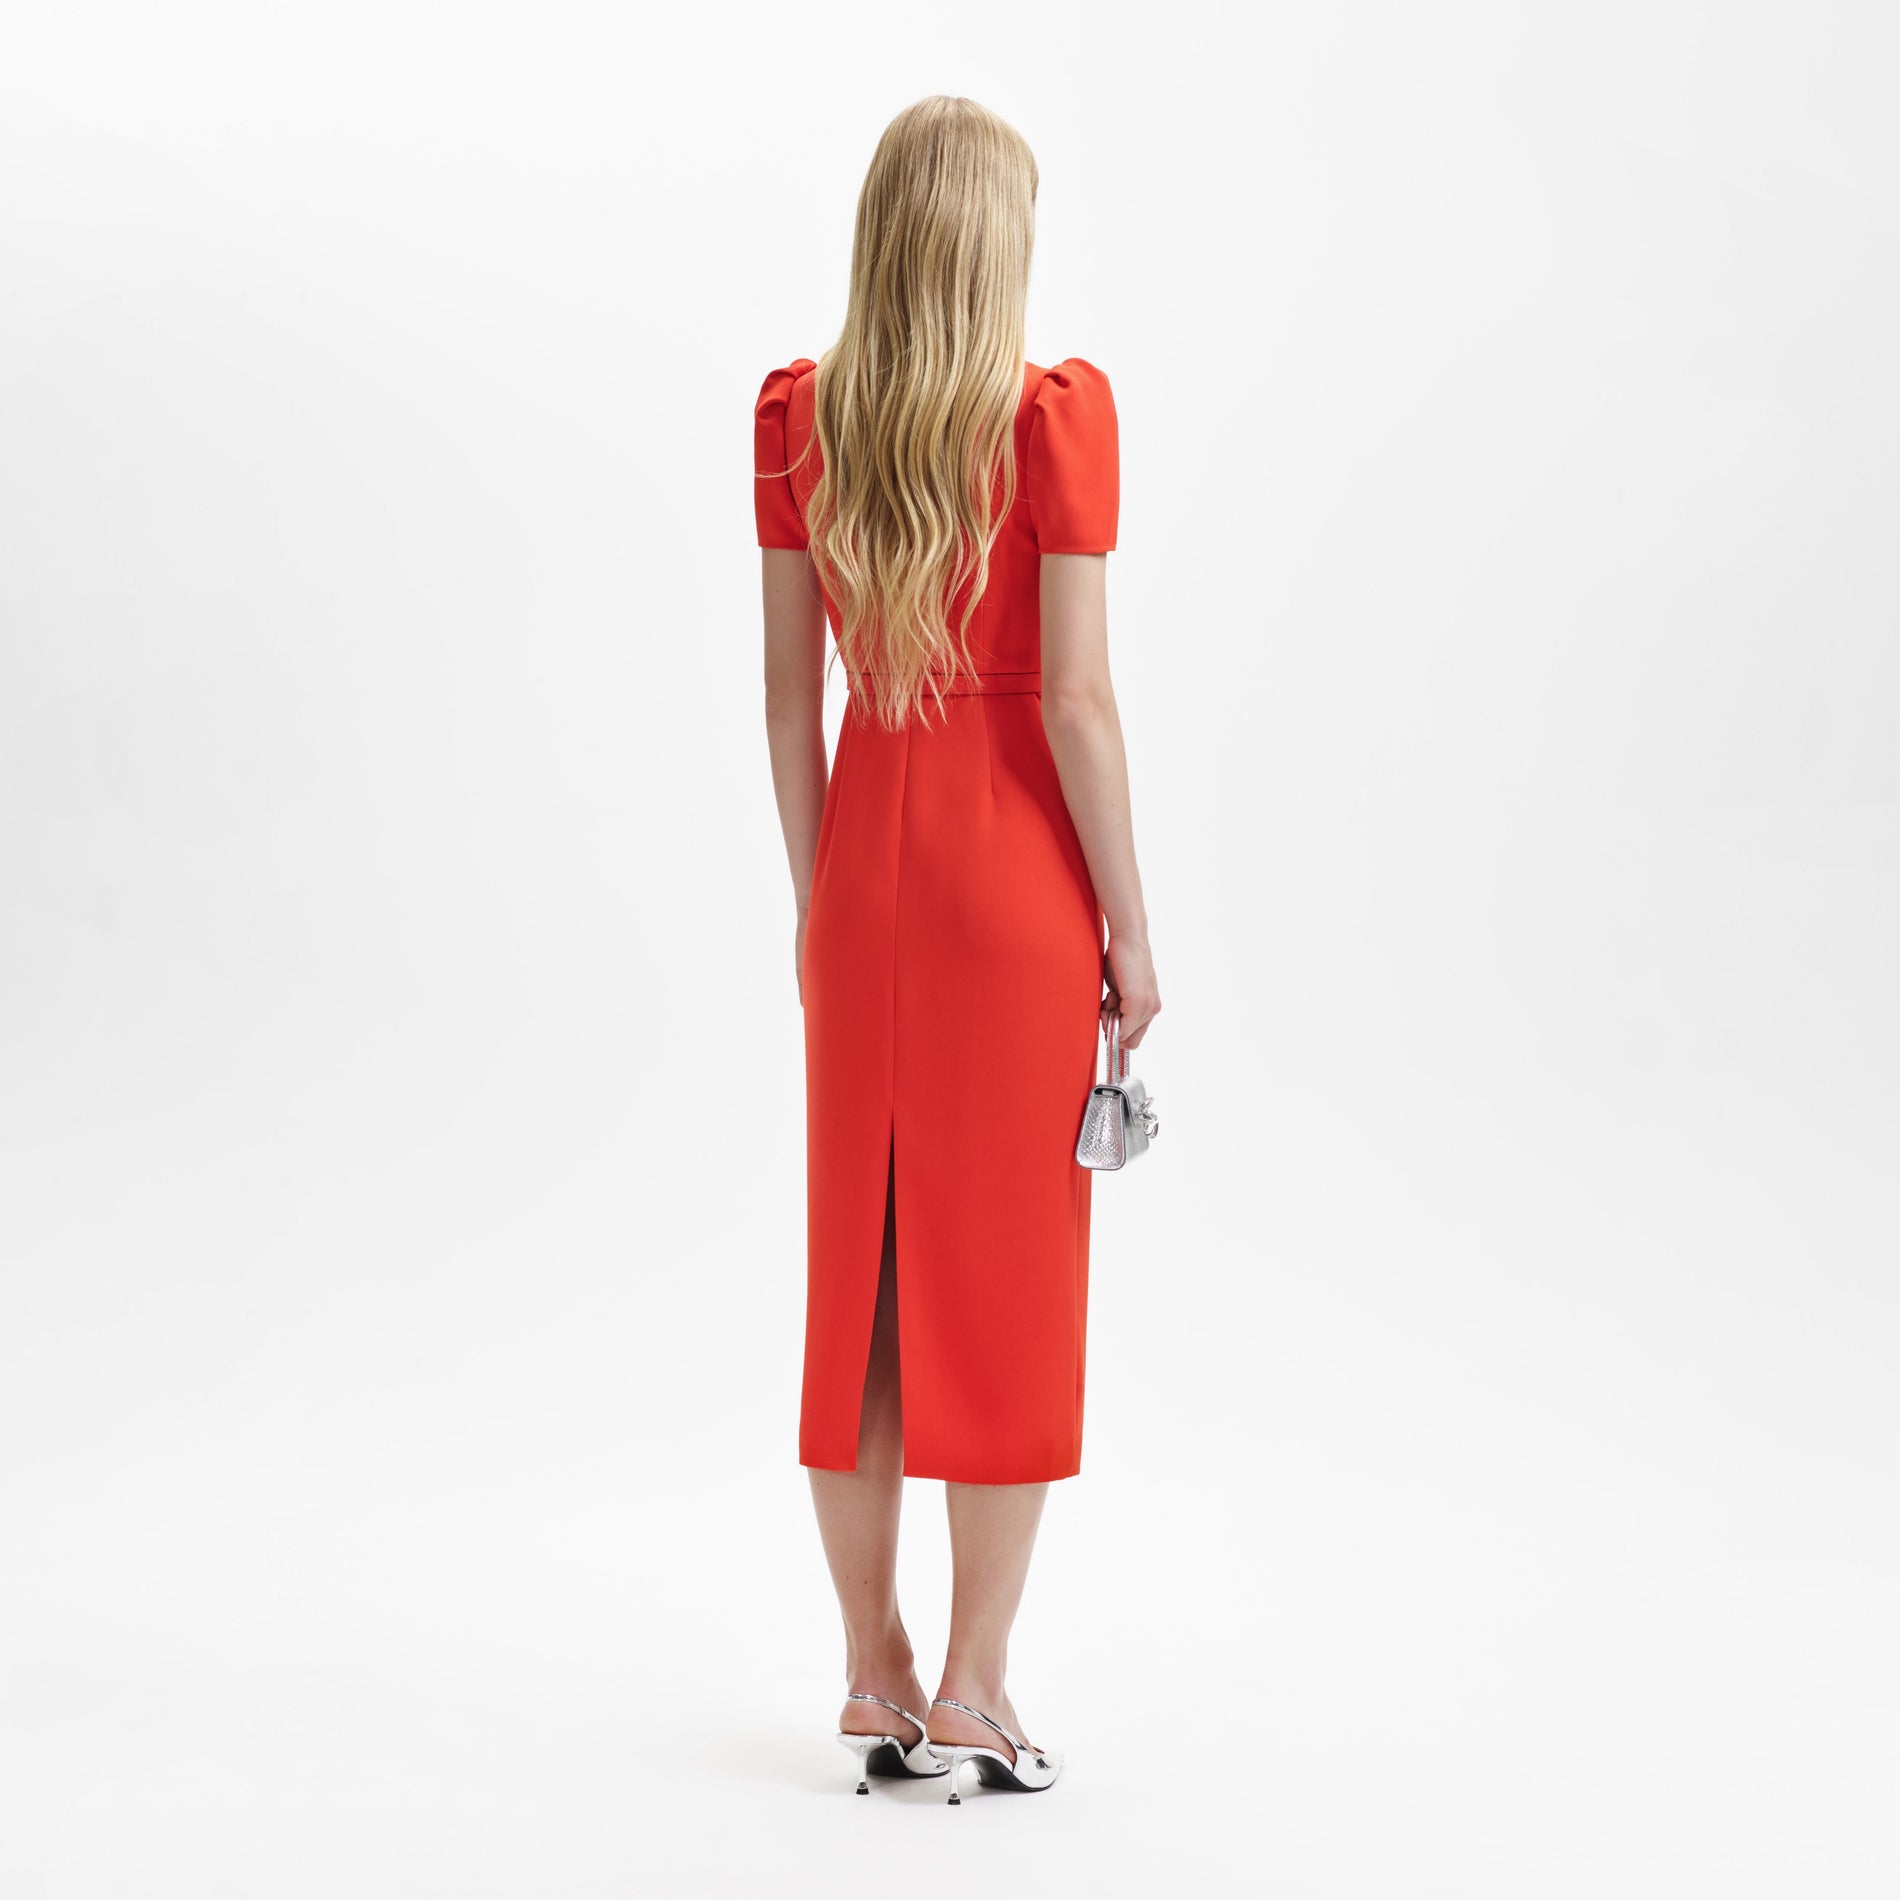 A woman wearing the Red Crepe Midi Dress